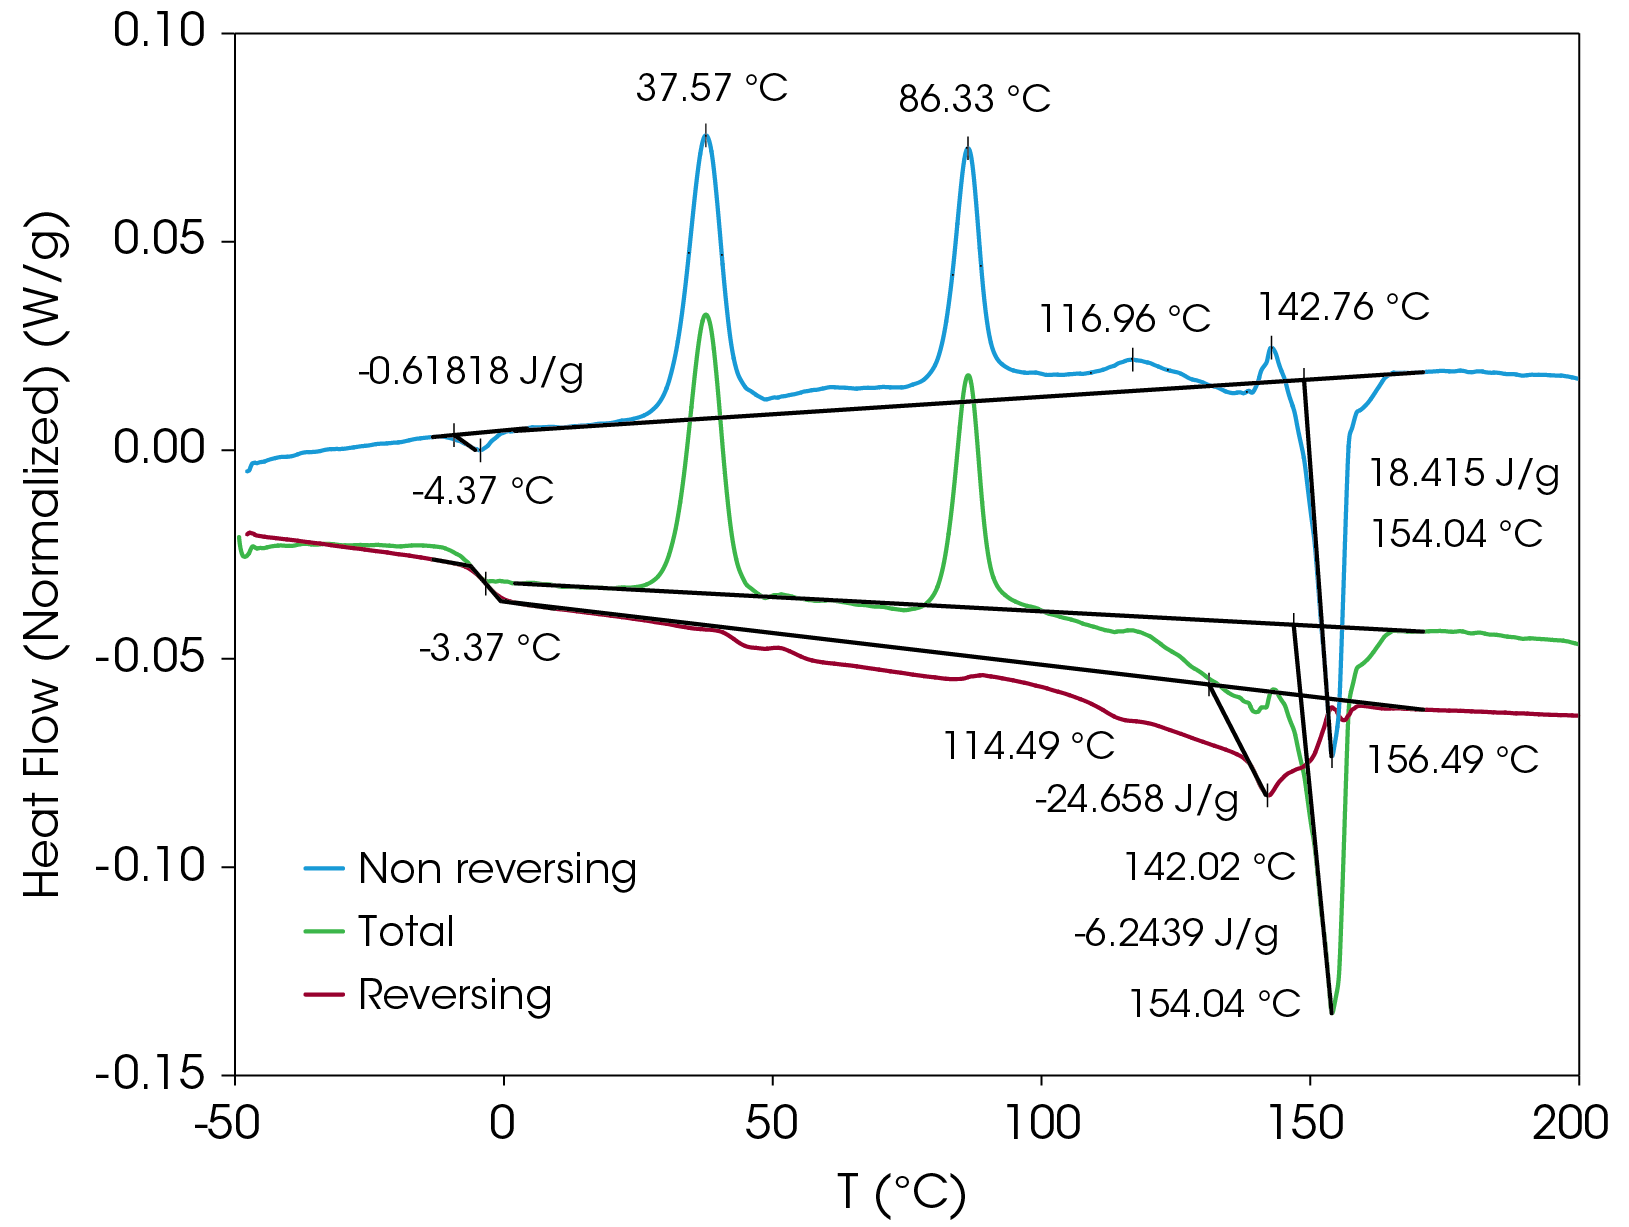 Figure 11. MDSC results of PHB sample with transitions analyzed